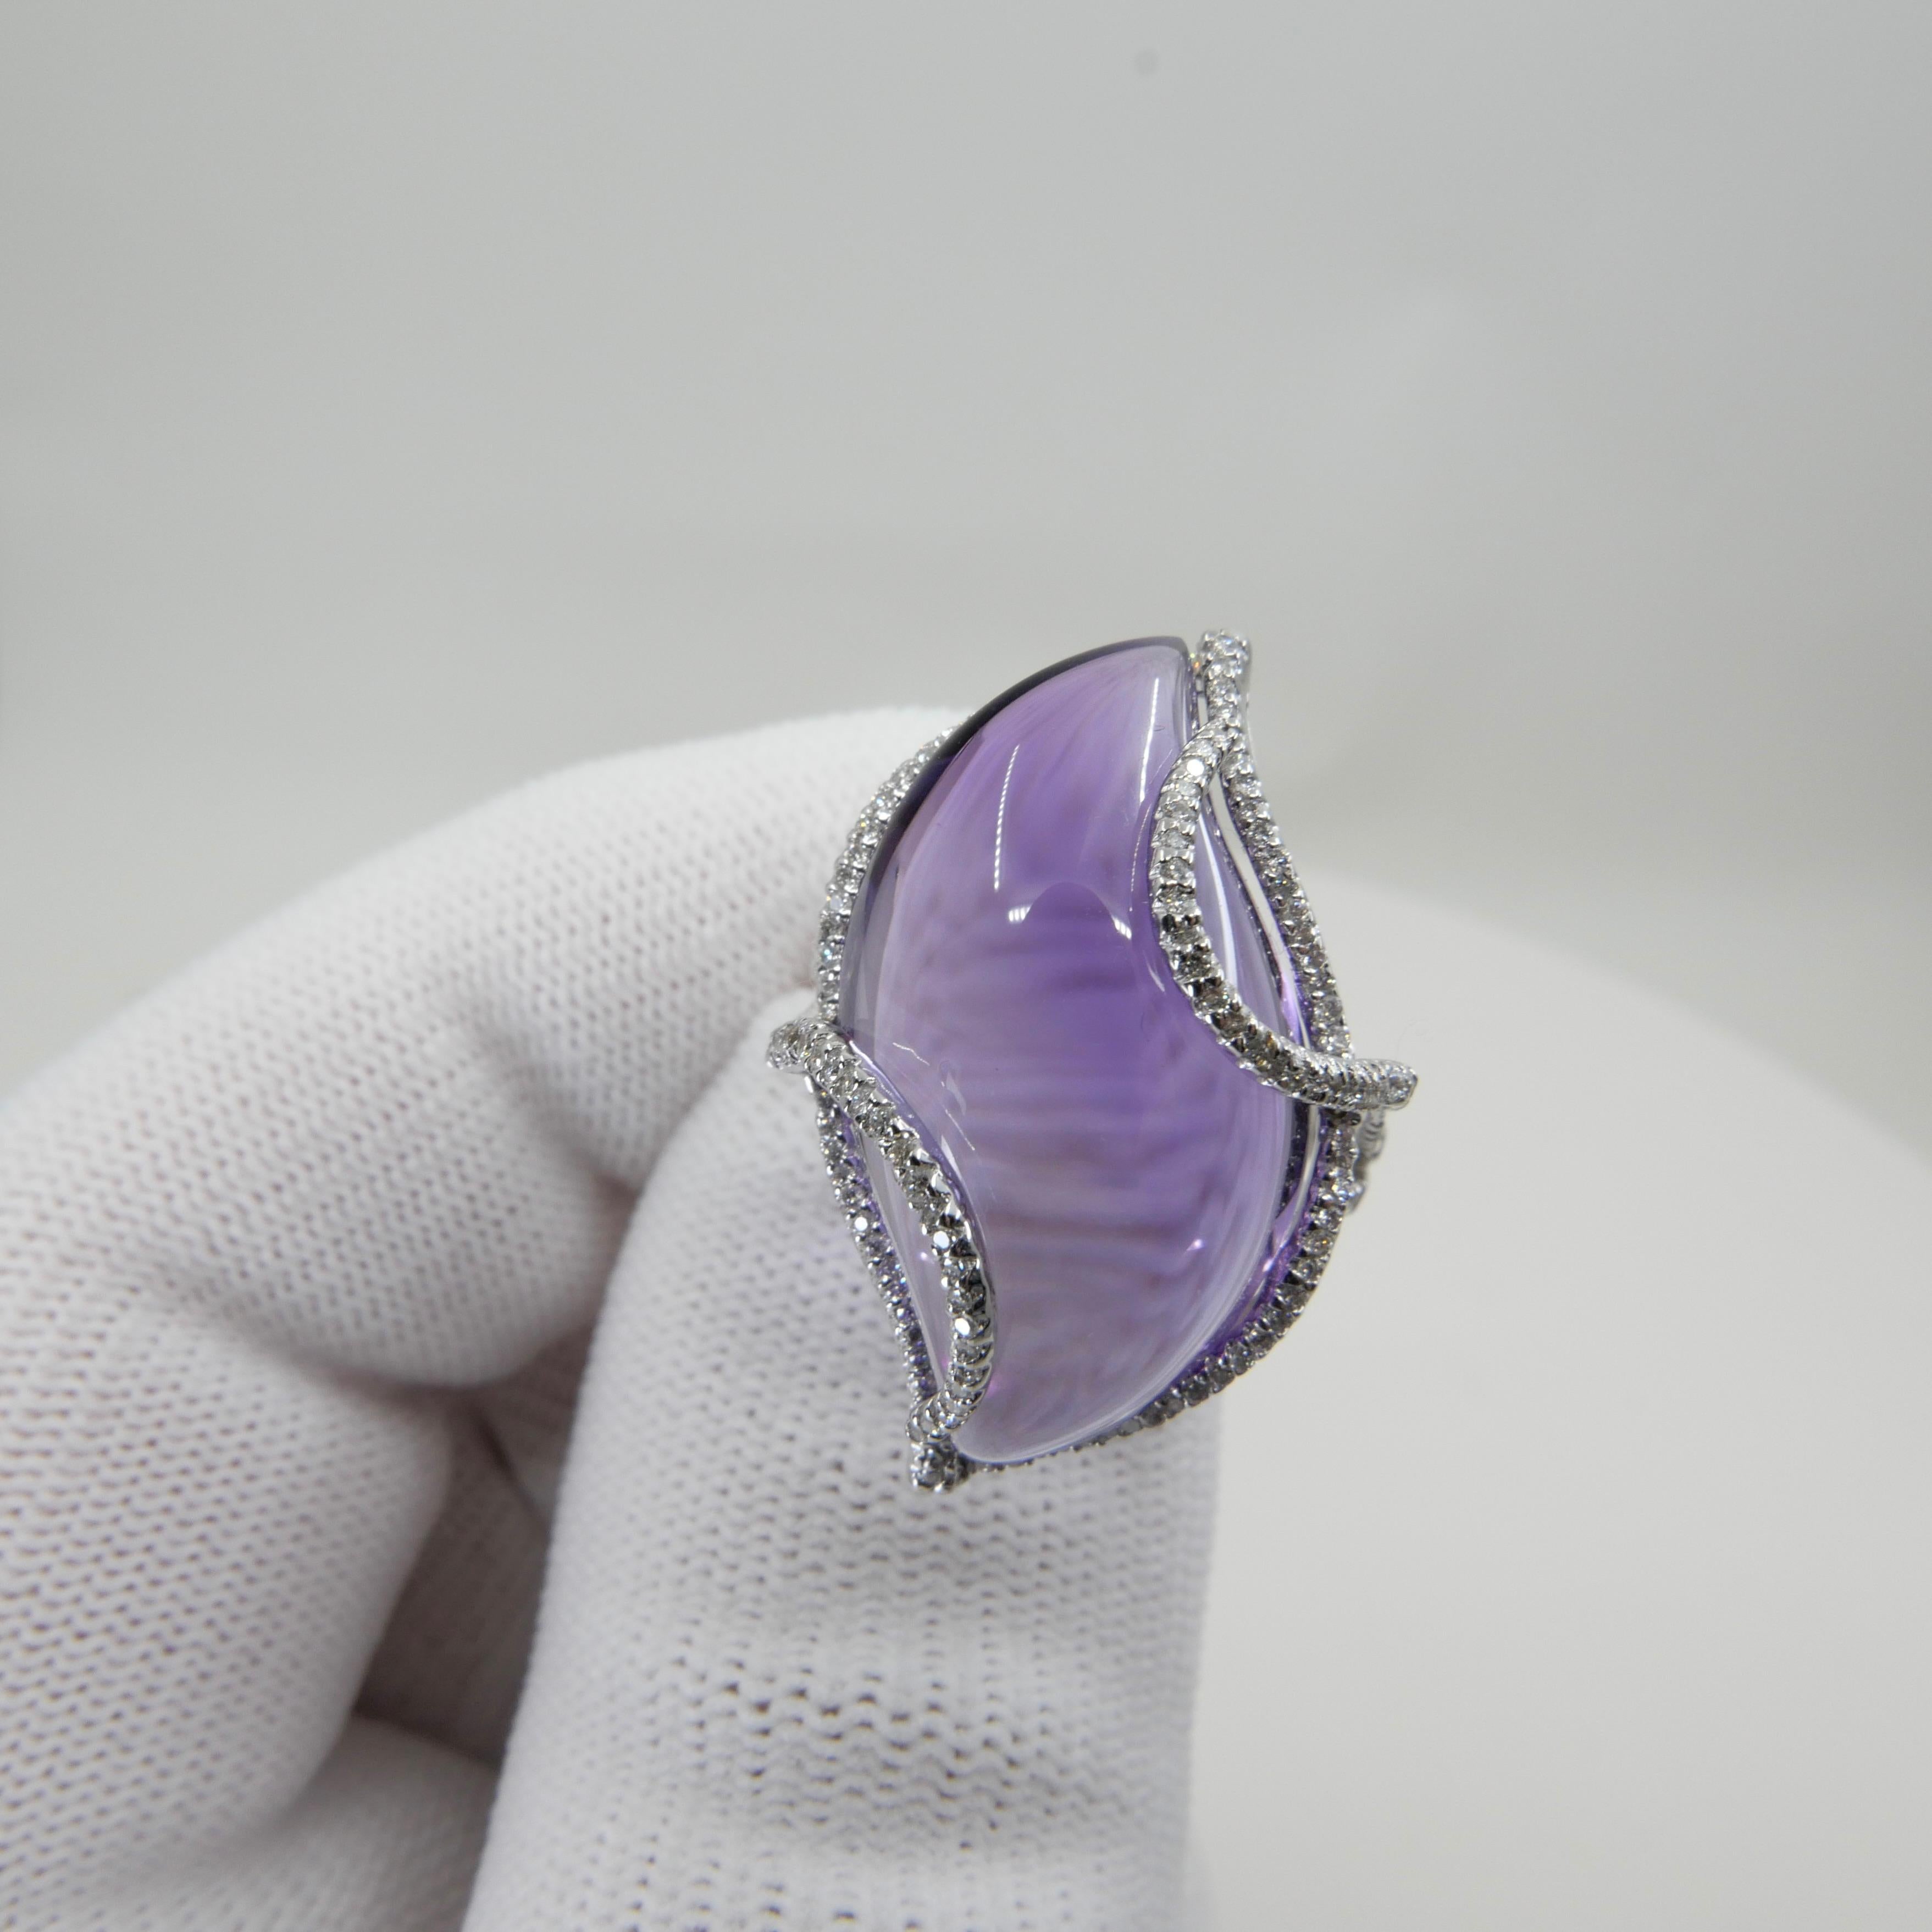 Cabochon 23 Carat Amethyst & Diamond Cocktail Ring. Large Contemporary Statement Ring.    For Sale